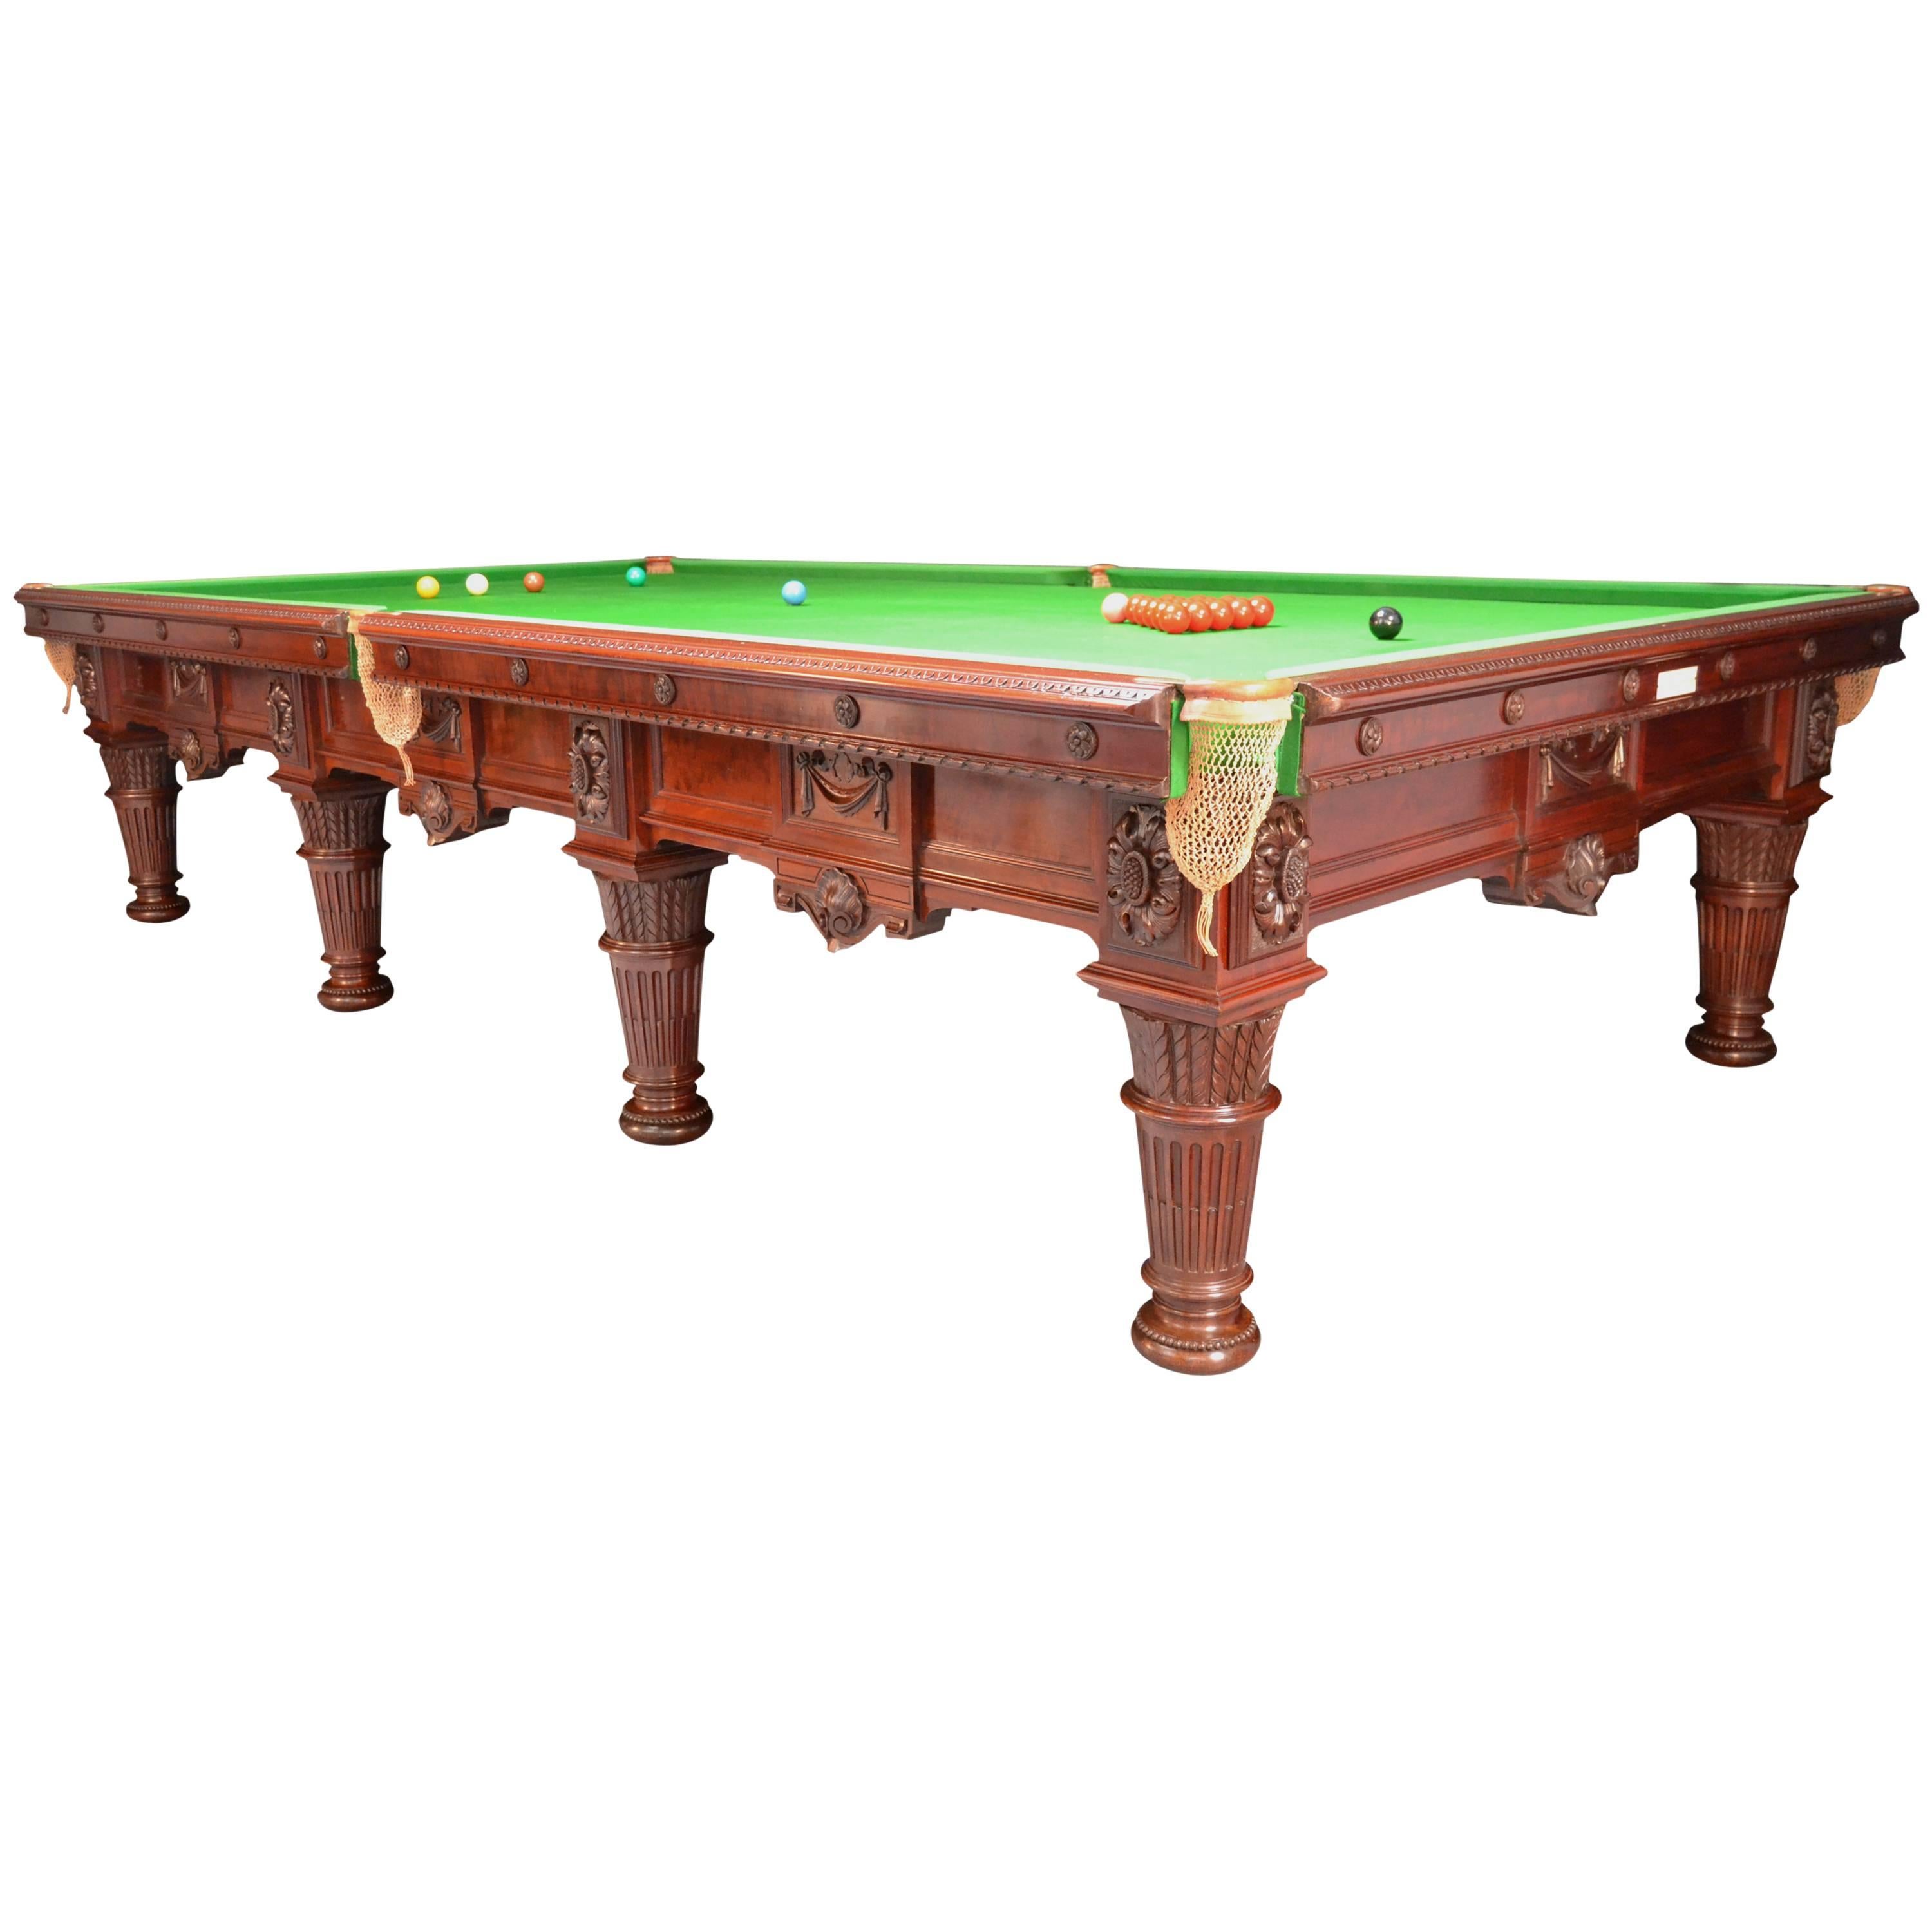 Billiard snooker pool table carved mahogany victorian 1894 english antique  For Sale